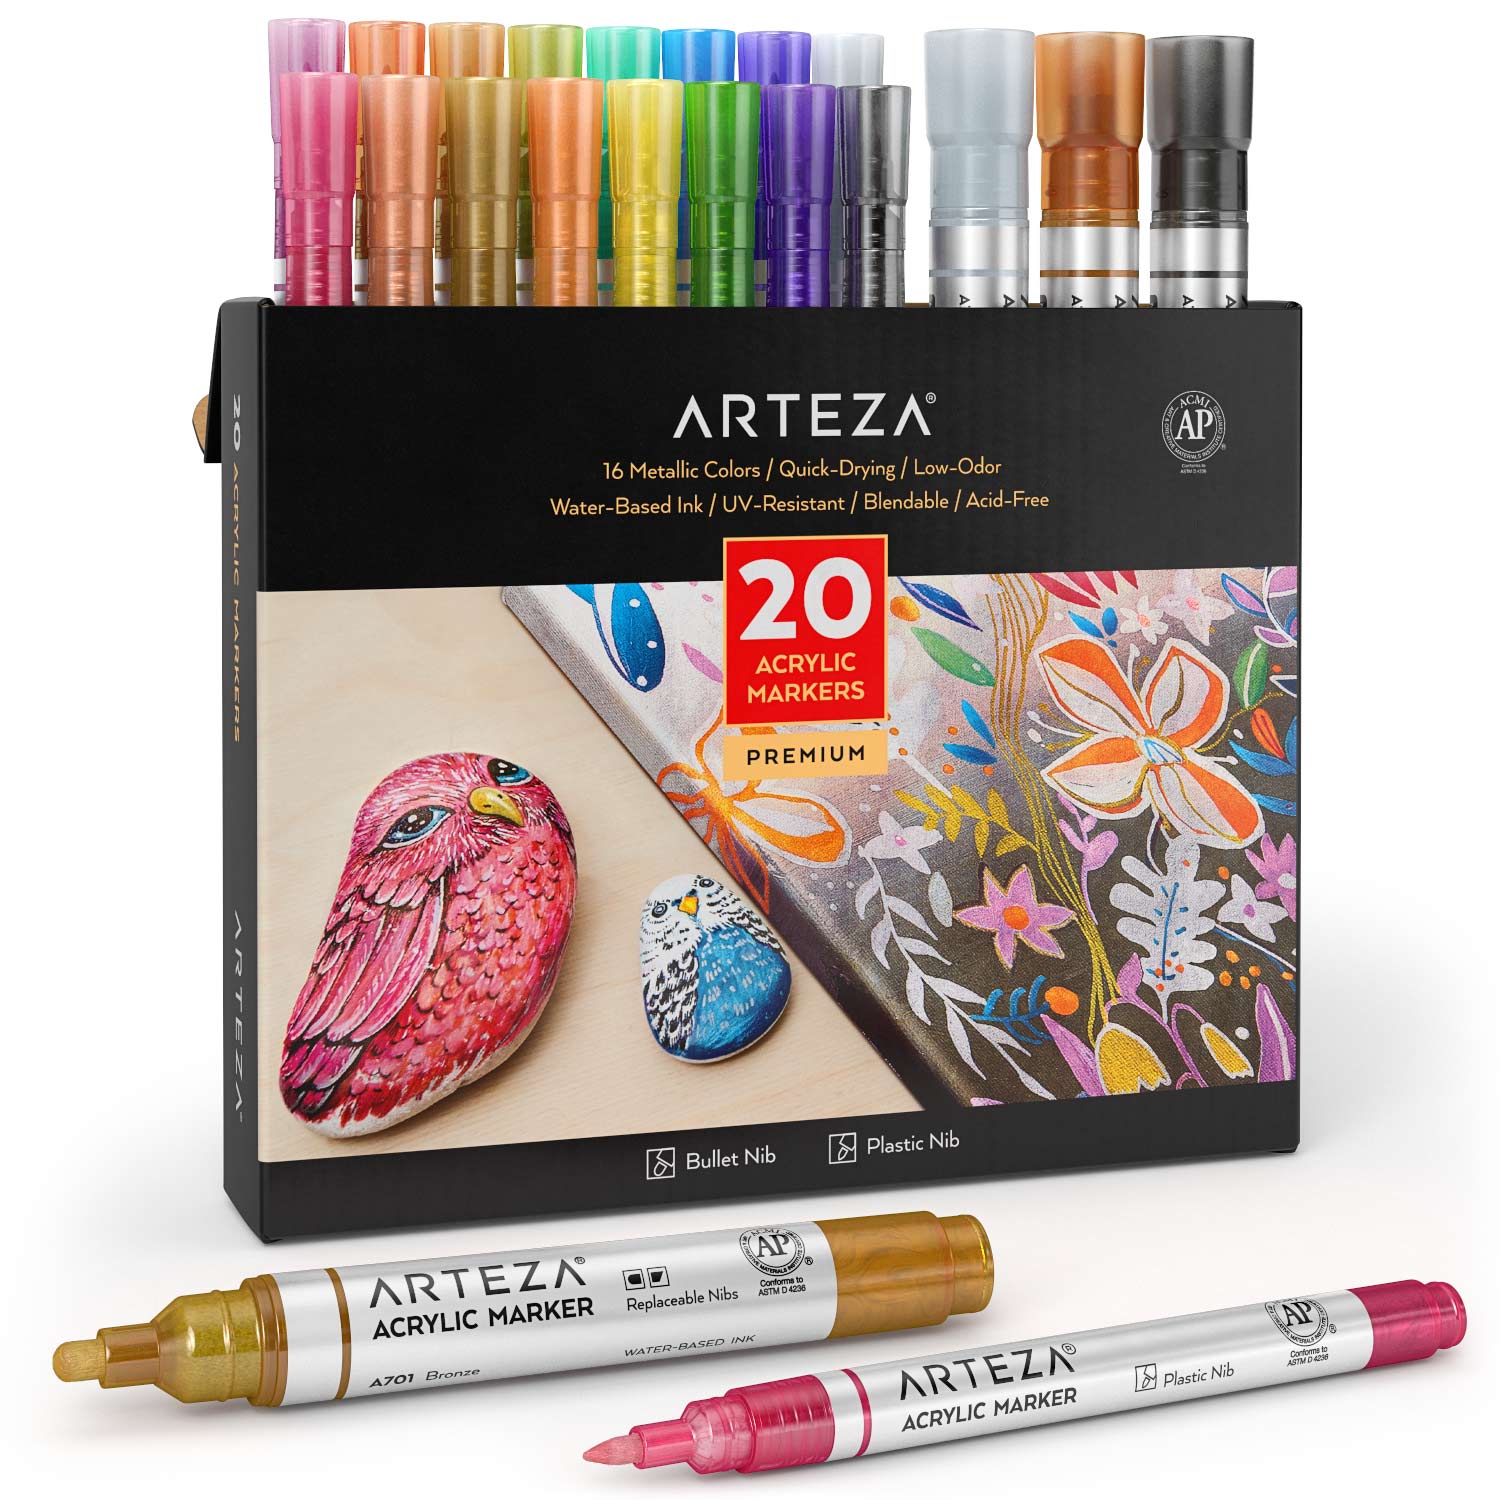 Shop Arteza Acrylic Paint Markers, Set of 20 at Artsy Sister. in